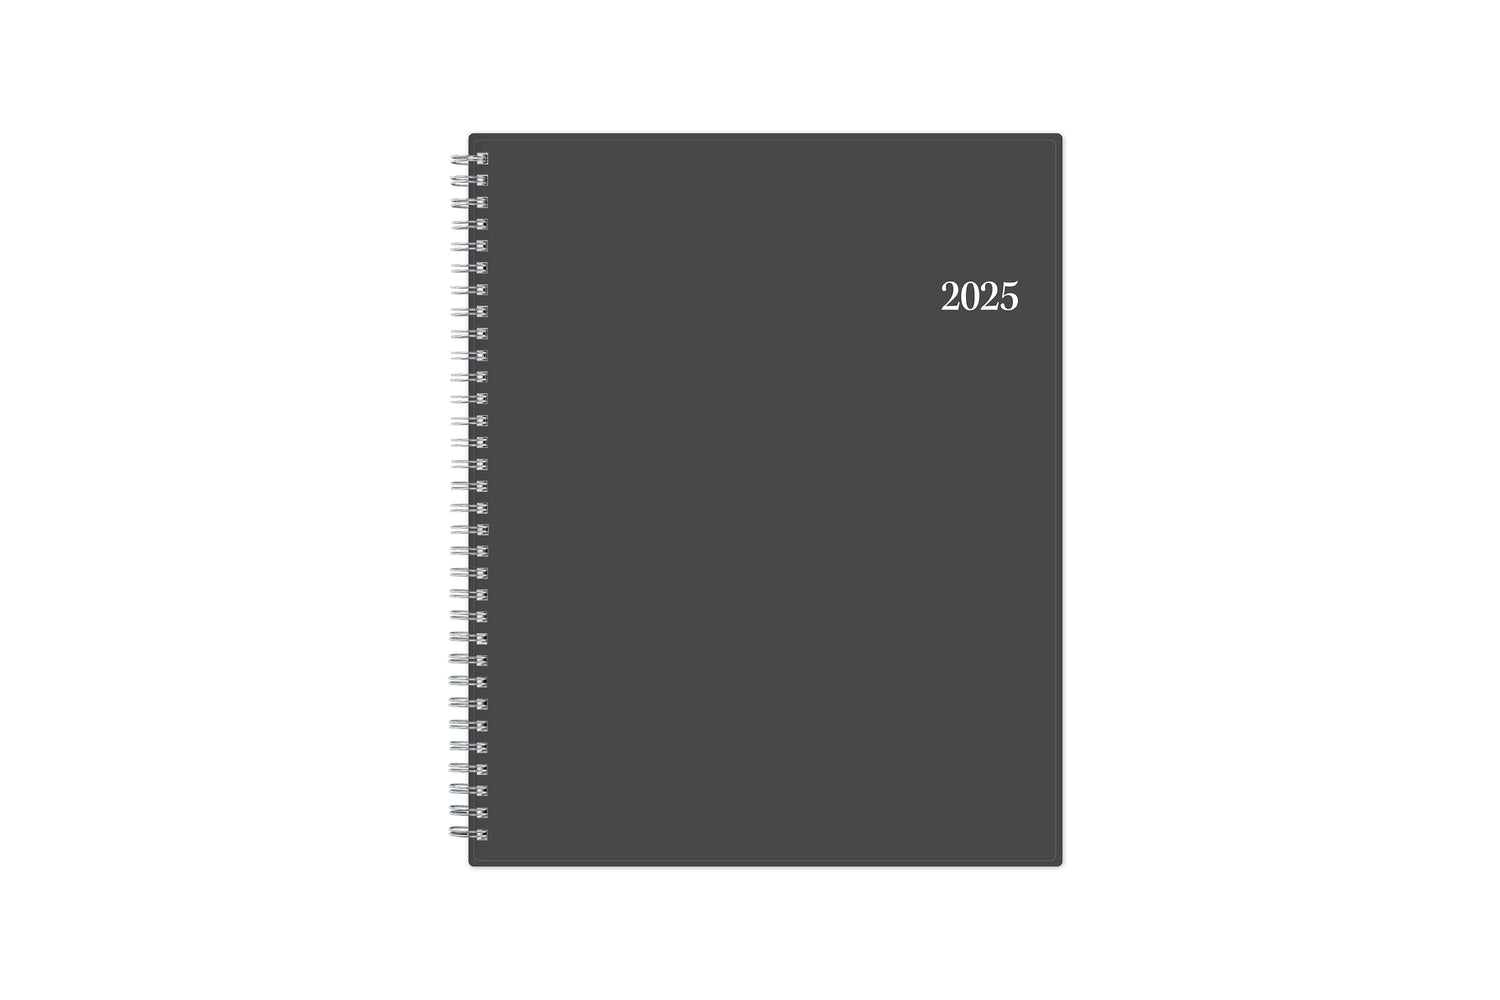 The January 2025 - December 2025 weekly appointment book from Blue Sky features a flexible charcoal front cover and twin silver wire-o binding